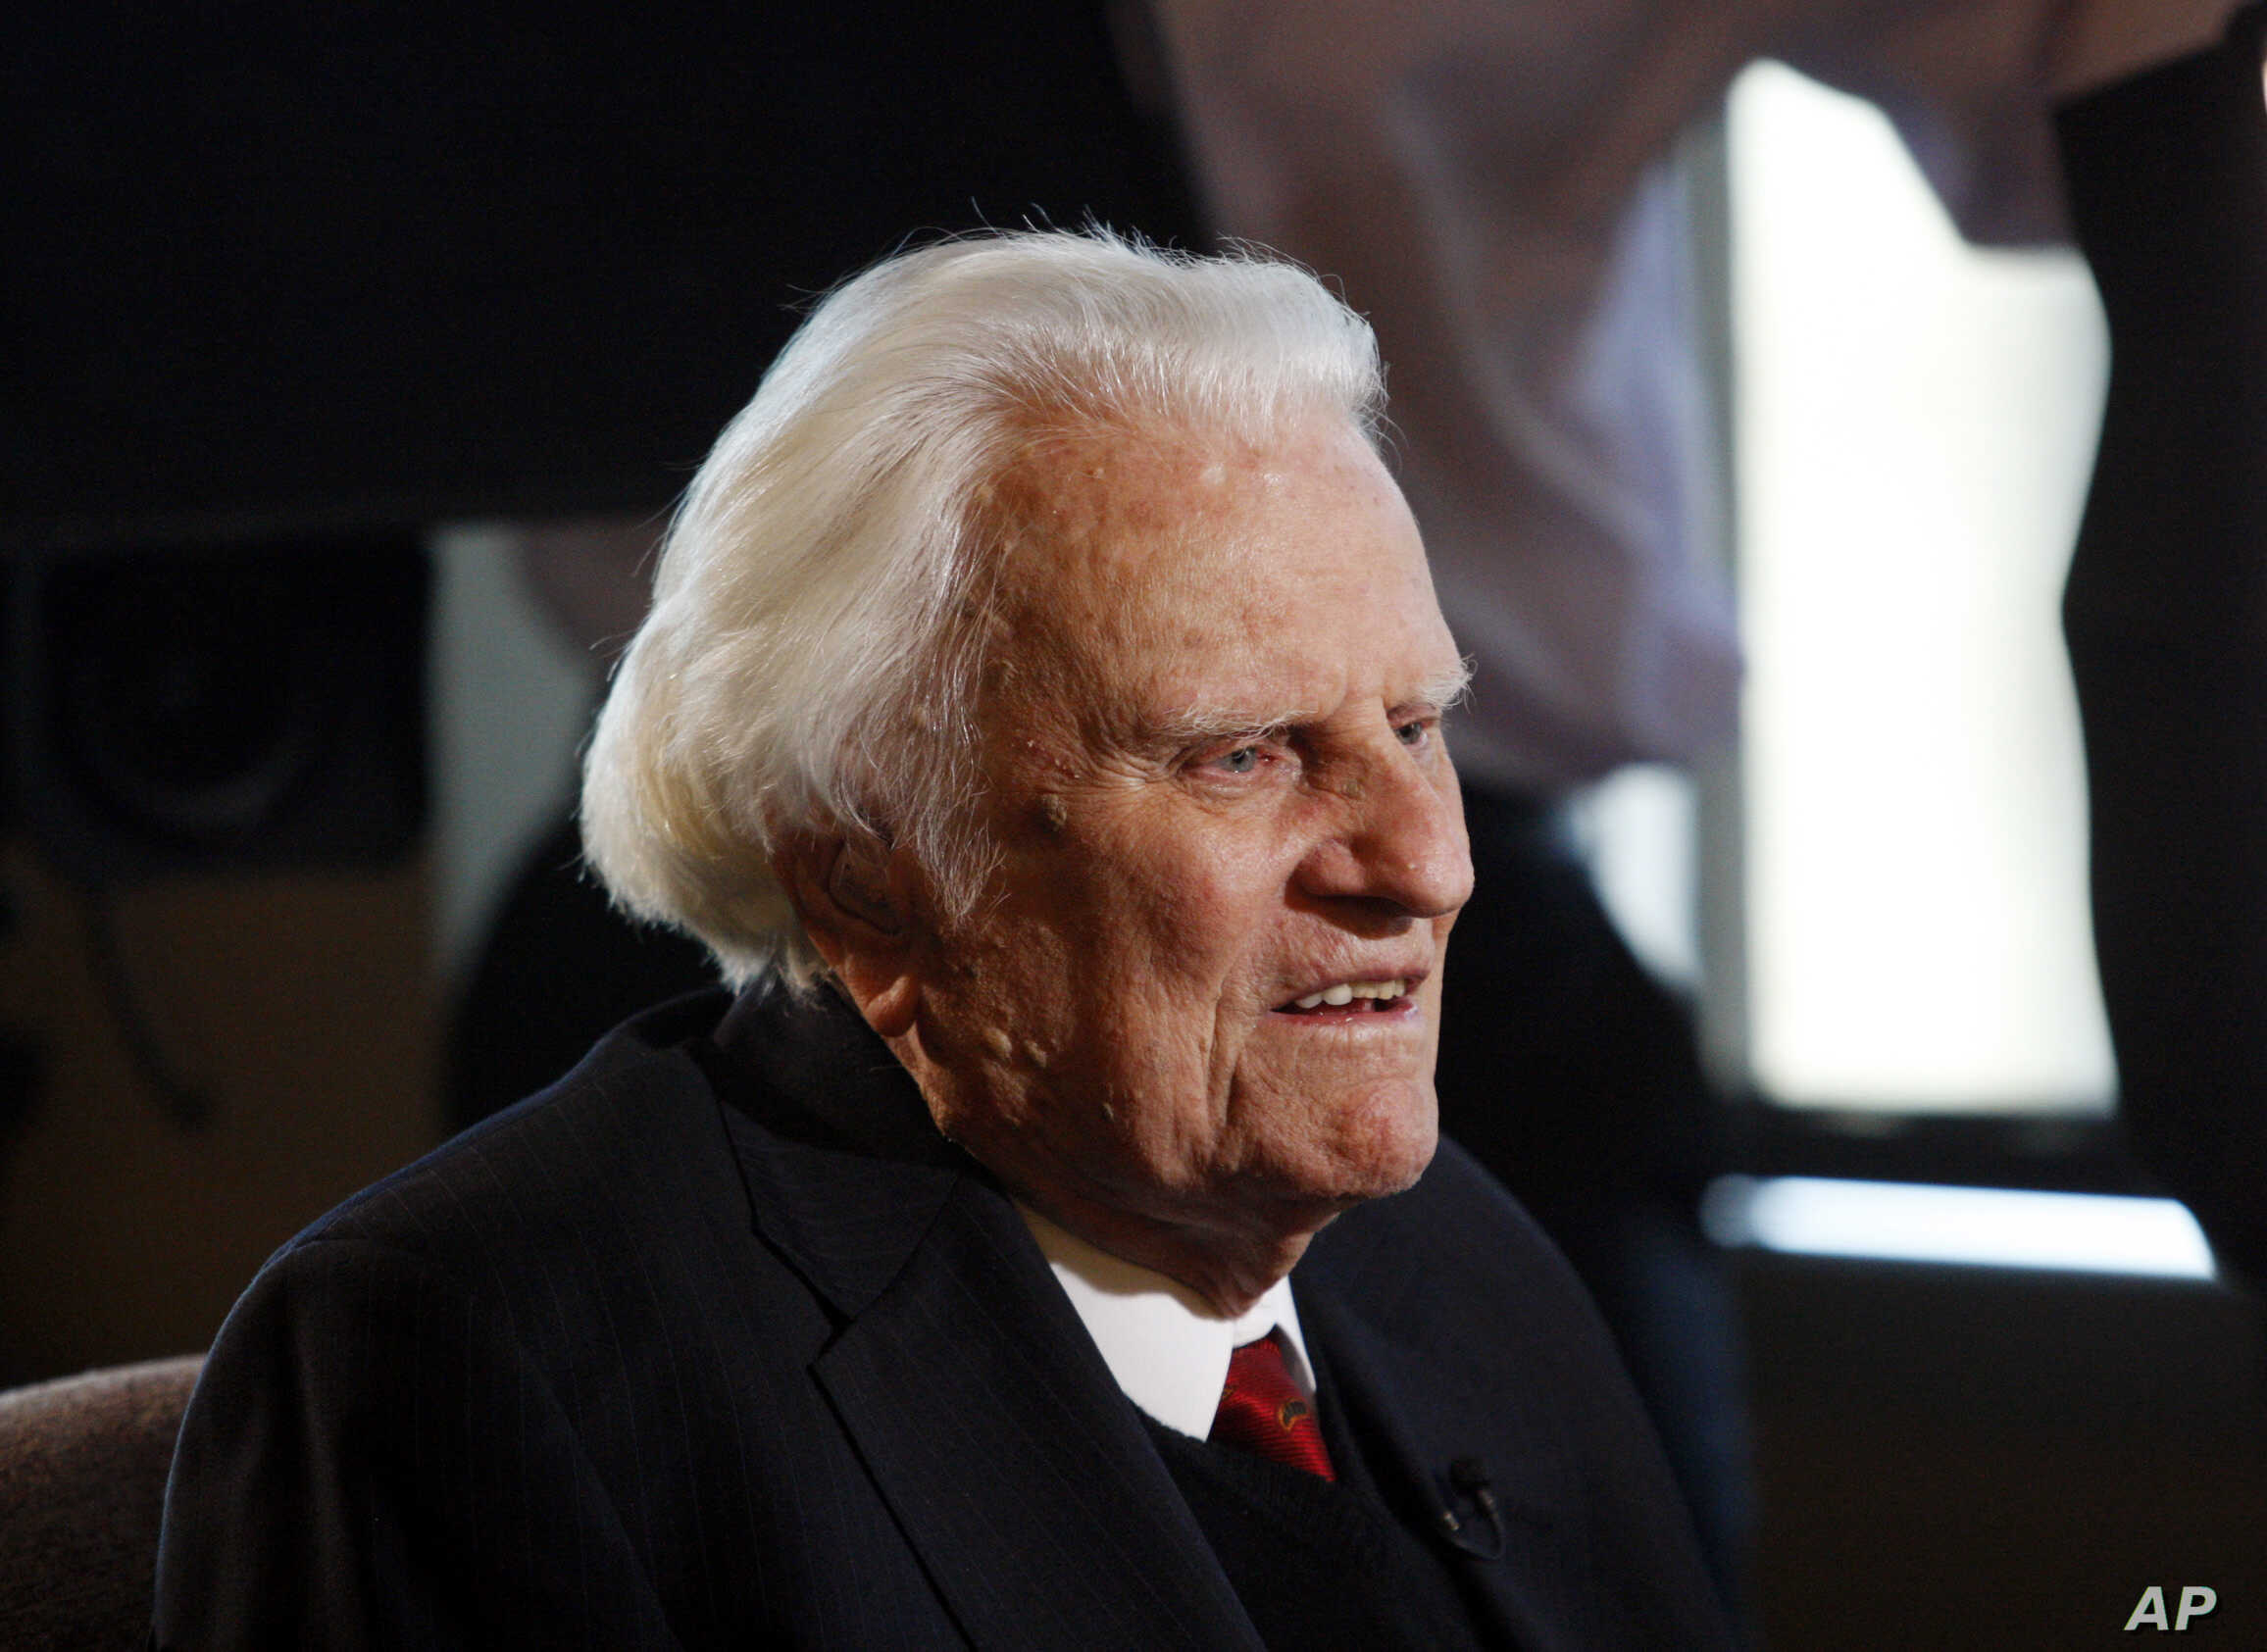 FREE MP3: Download ALL Evangelist BILLY GRAHAM Messages & Audio Sermons 1